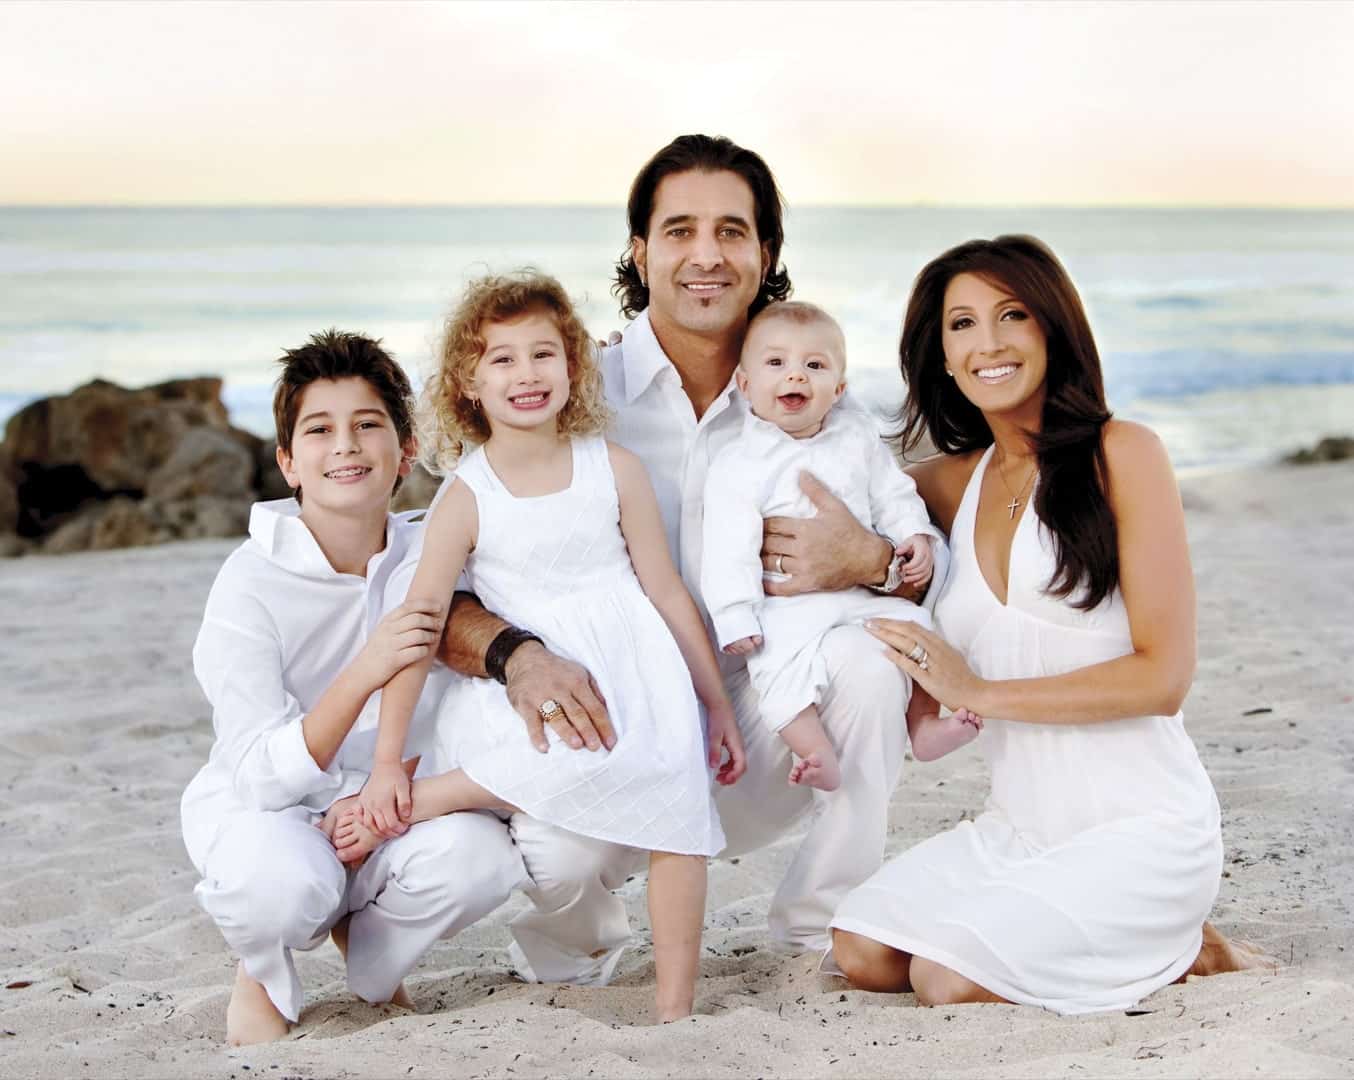 Image of Scott Stapp with his wife, Jaclyn Stapp, and their kids